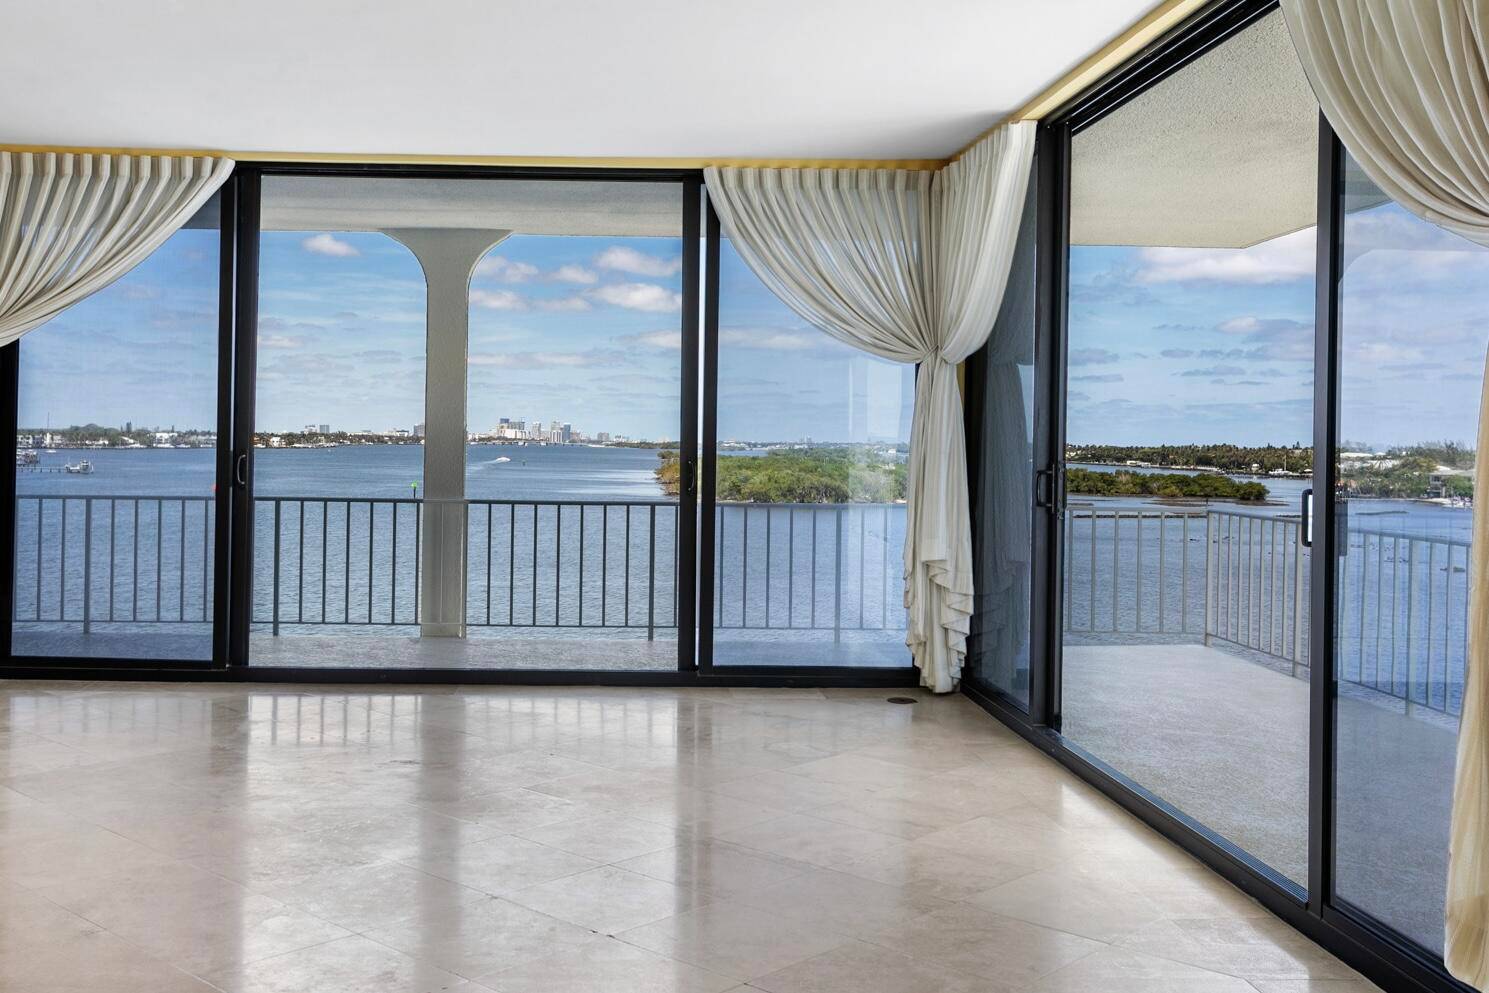 Incredible opportunity to purchase this elegantly situated bright 5th floor Two Bedroom, Two Bath Premiere Penthouse offering stunning wide intracoastal views from the desirable Boutique Tower Vallandry Condominium !